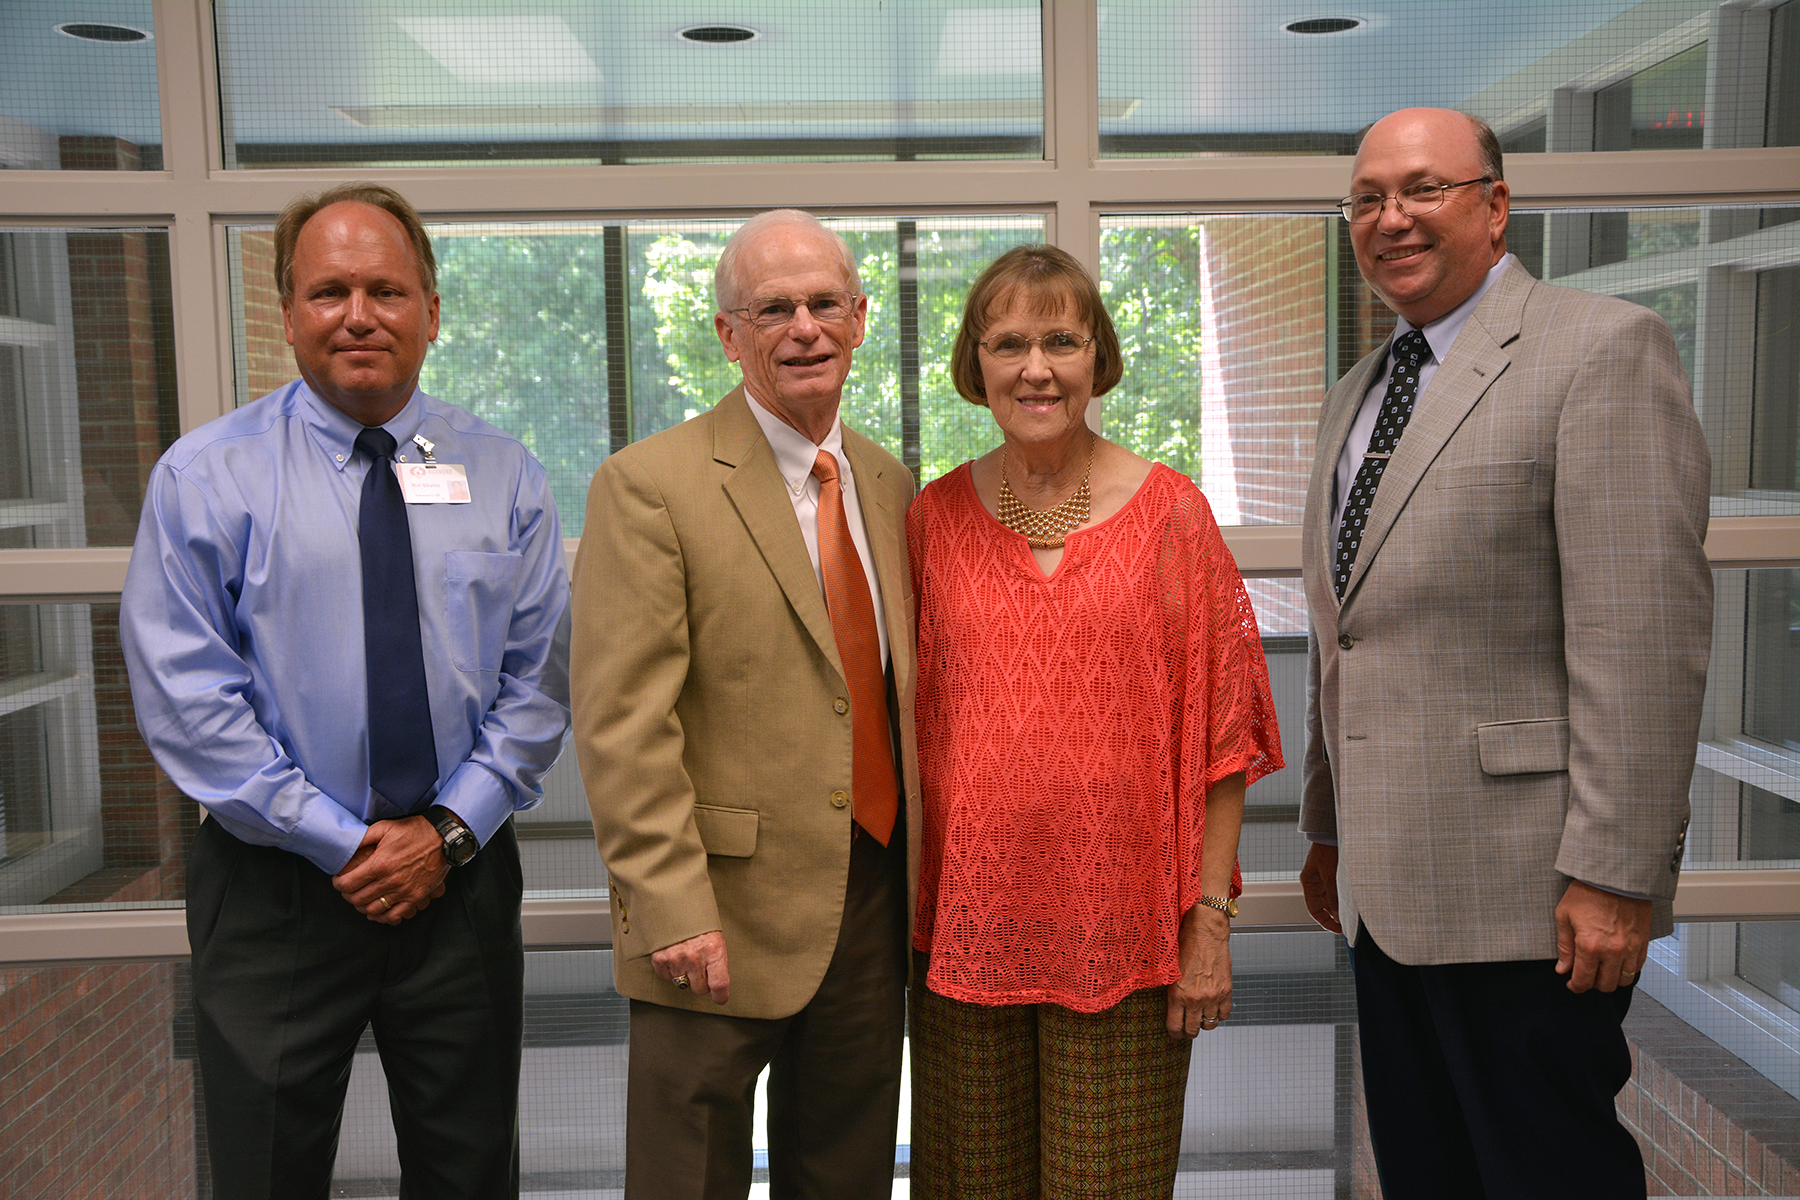 Dr. Hal Shuler, far left, and Dr. Dale McInnis, far right, stand with Bill and Jan Cooke after a reception for the new scholarship they established at Richmond Community College in memory of Bill’s parents.